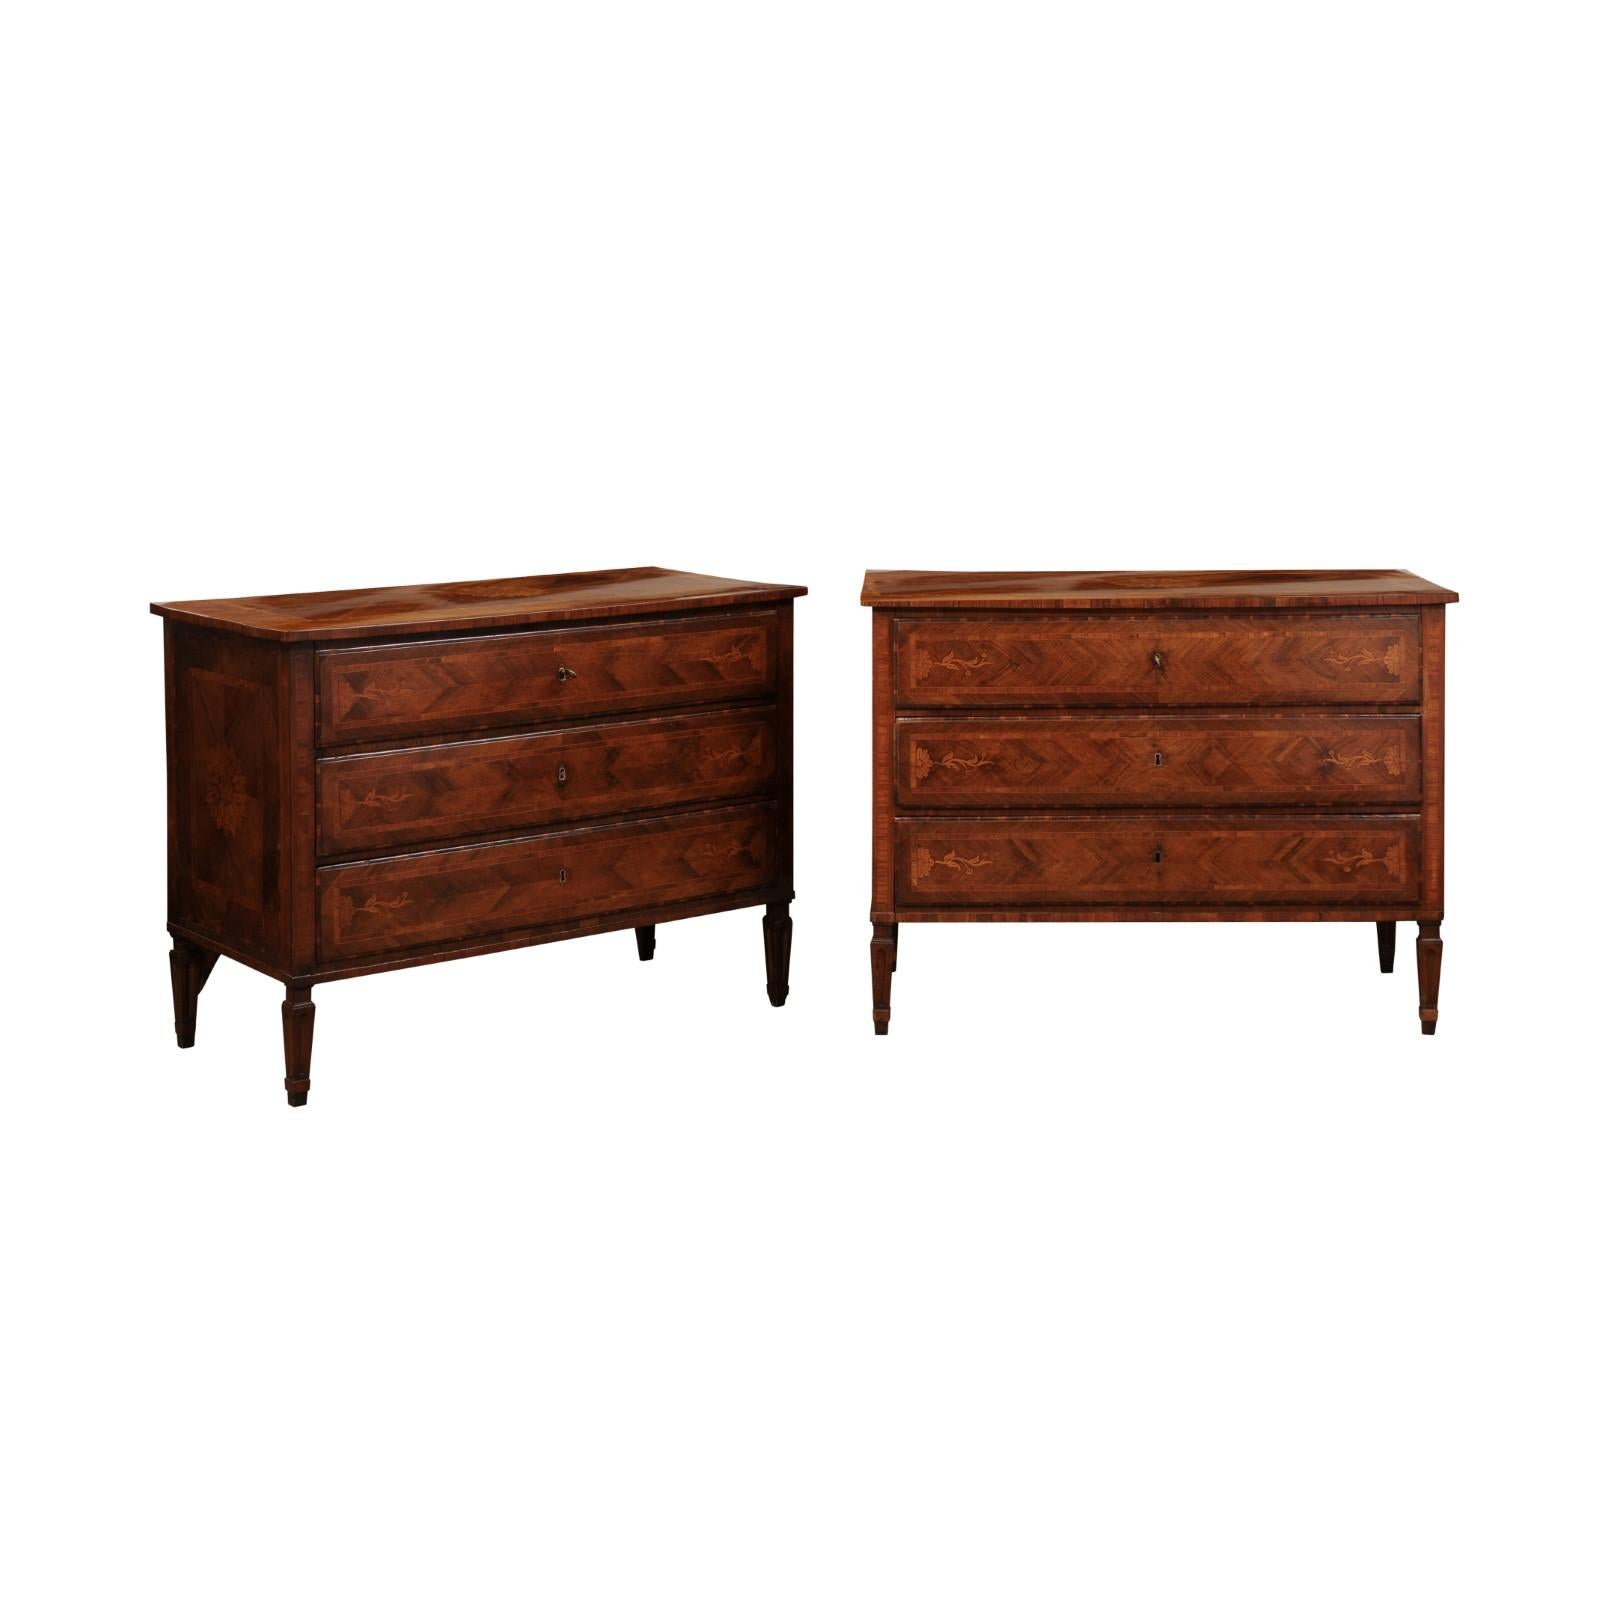 Pair of Italian neoclassical Walnut Commodes with Foliage Design, early 19th century.